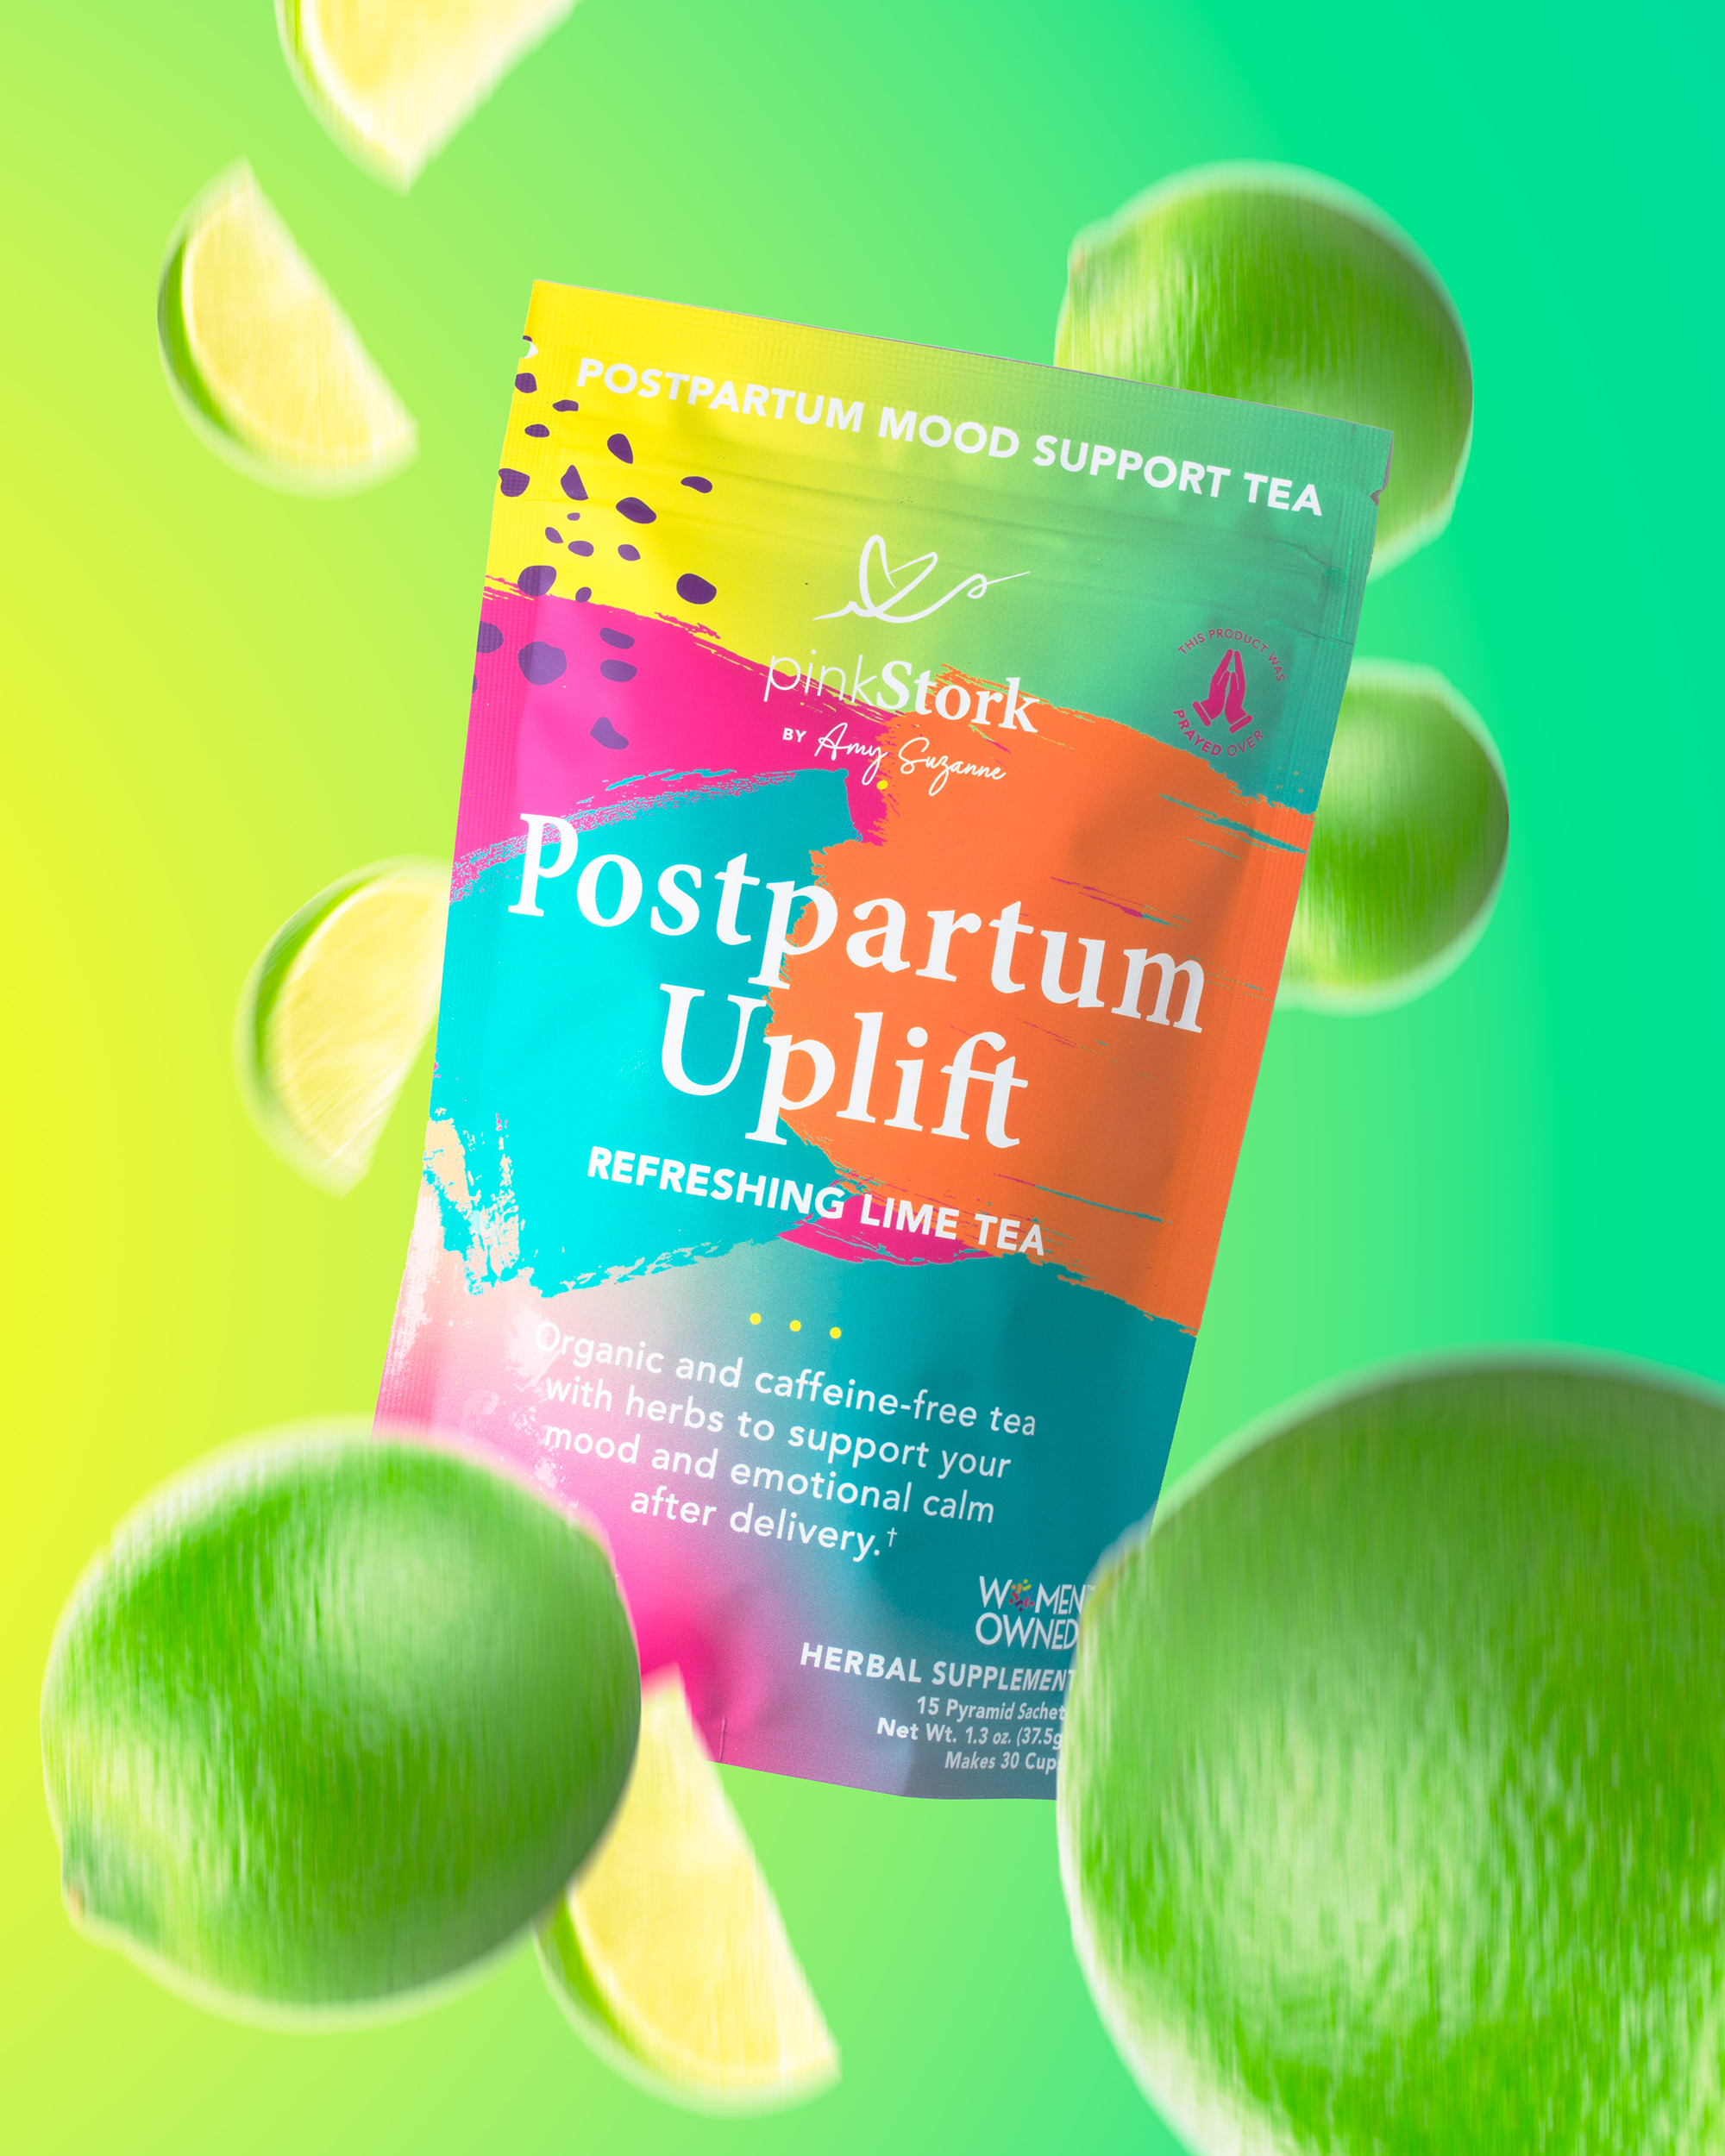 Post Partum Uplift from Pink stork